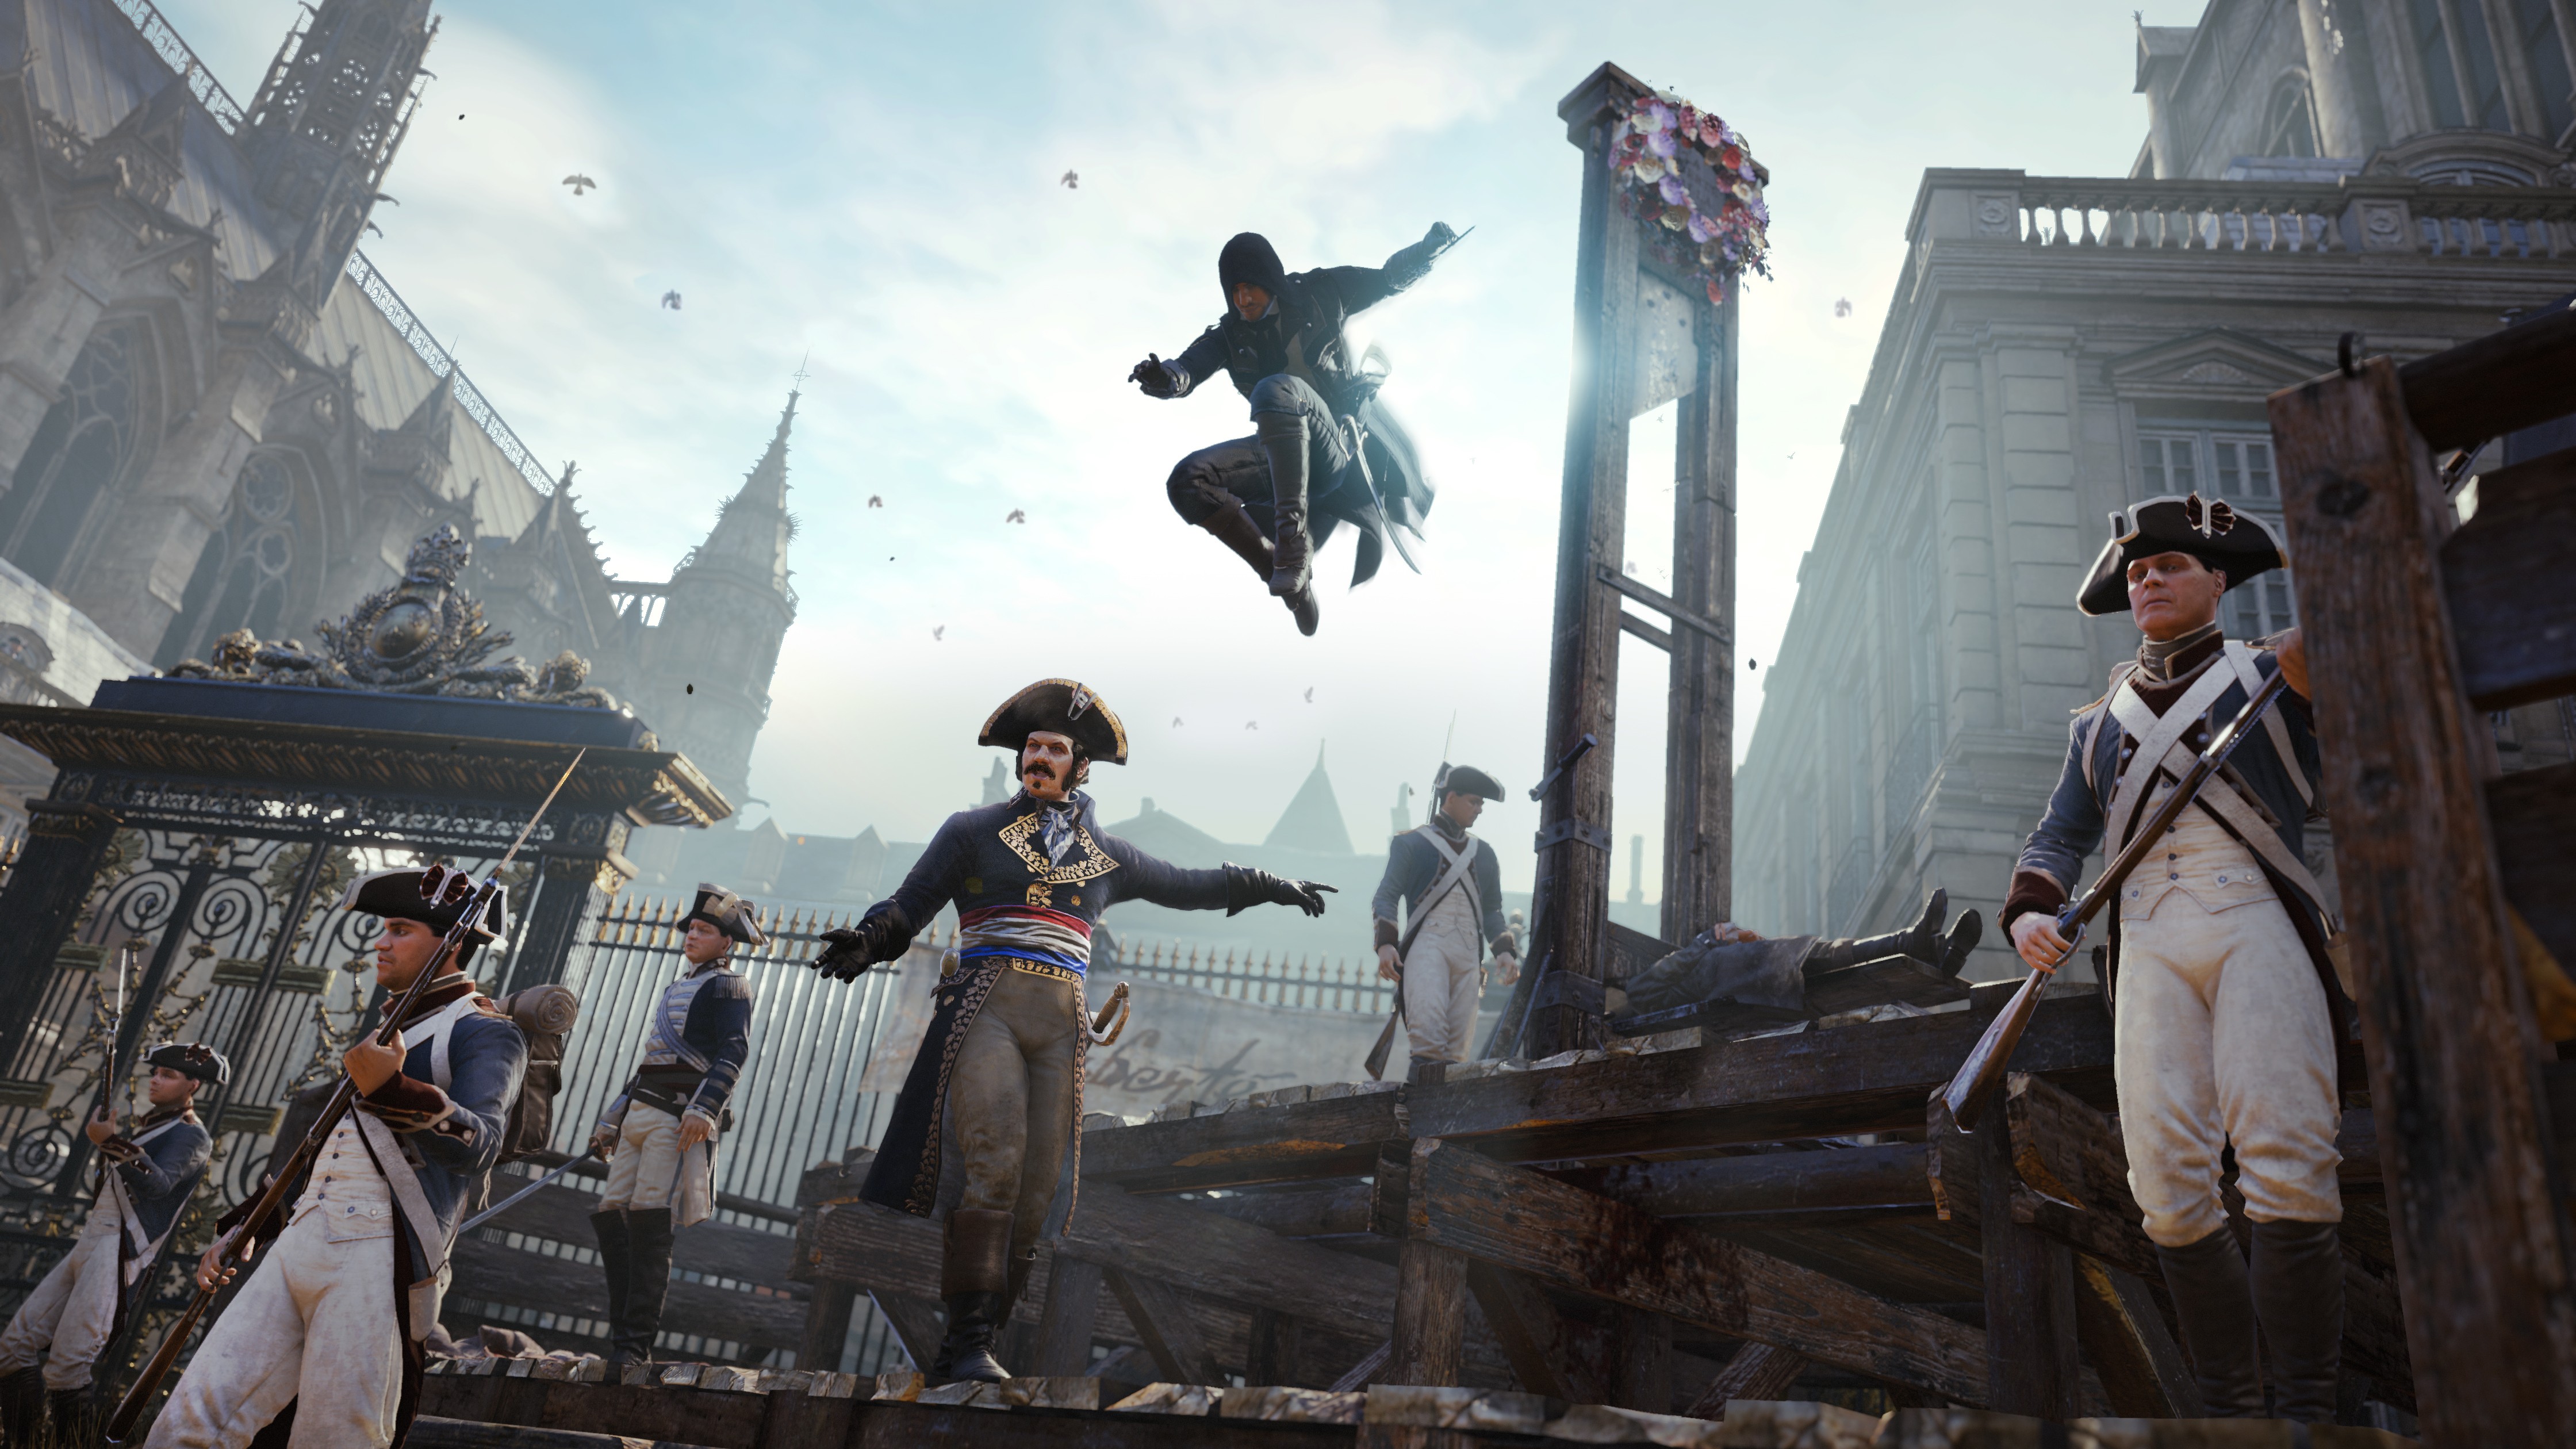 General 4480x2520 Assassin's Creed Assassin's Creed:  Unity video games PC gaming